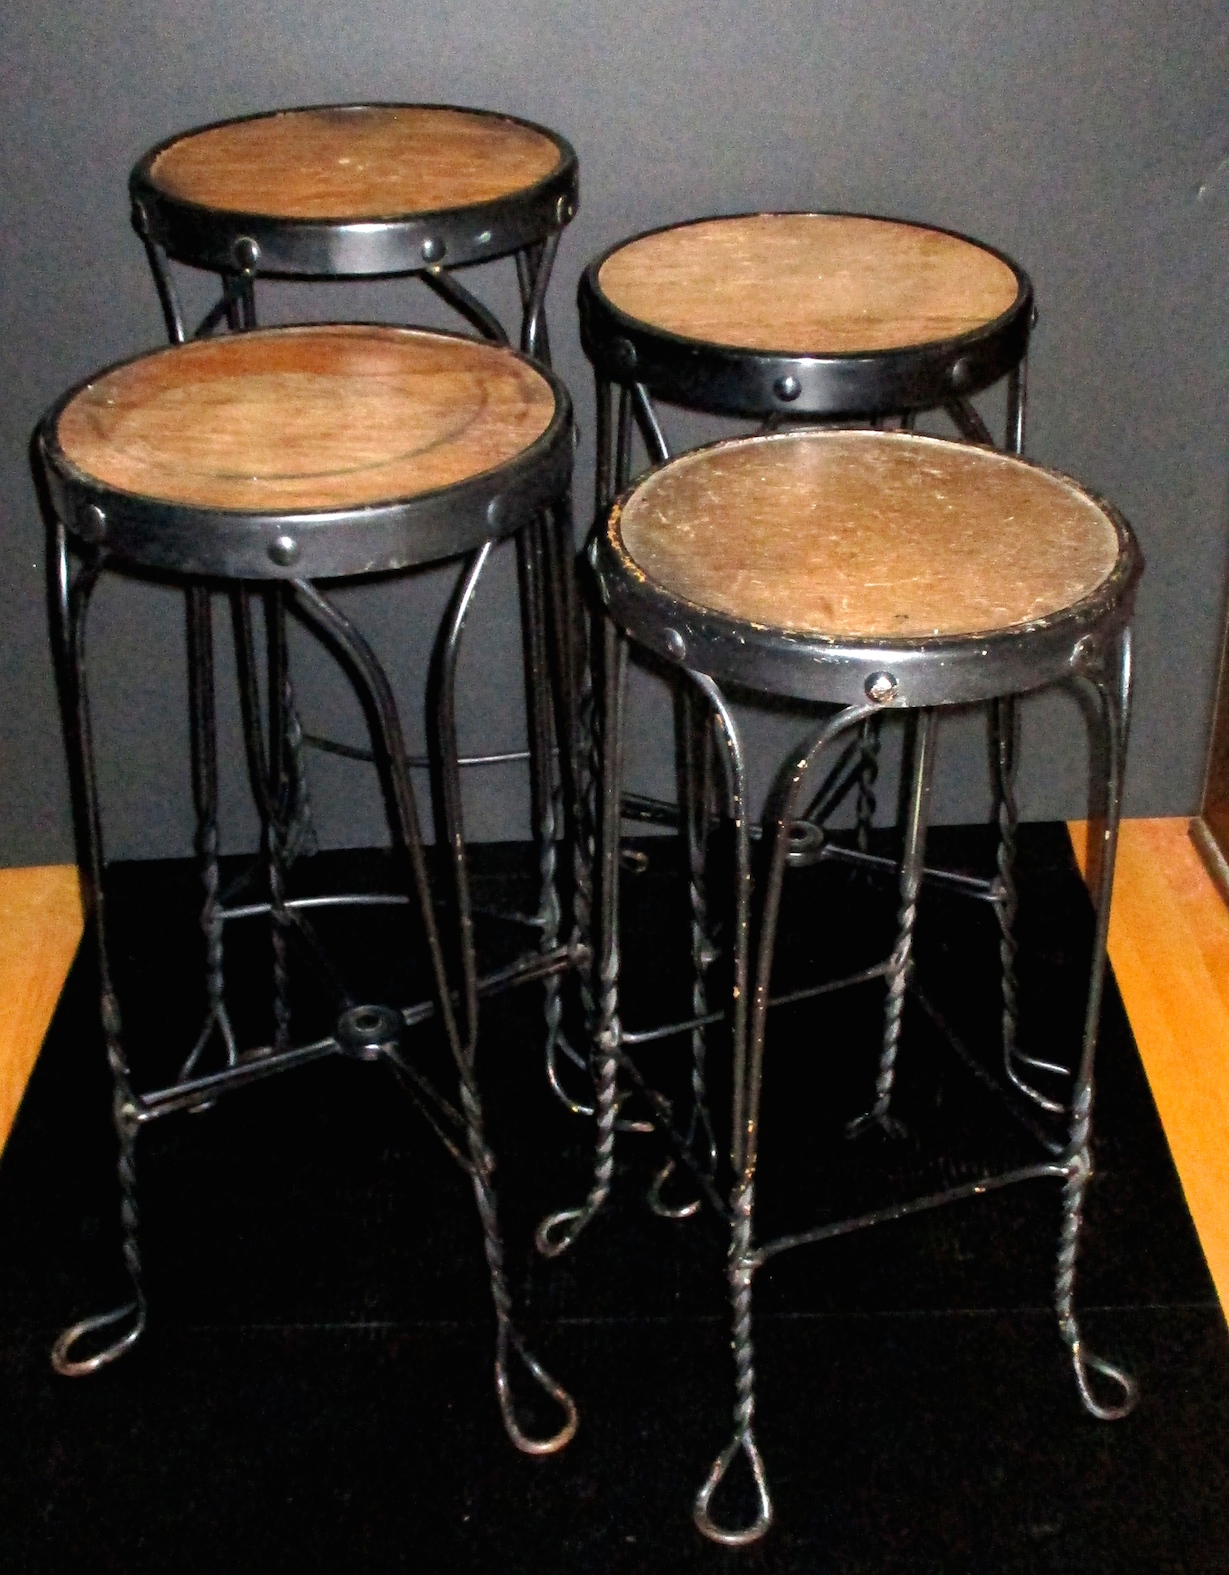 Twisted Wire Ice Cream Parlor Stools - SOLD